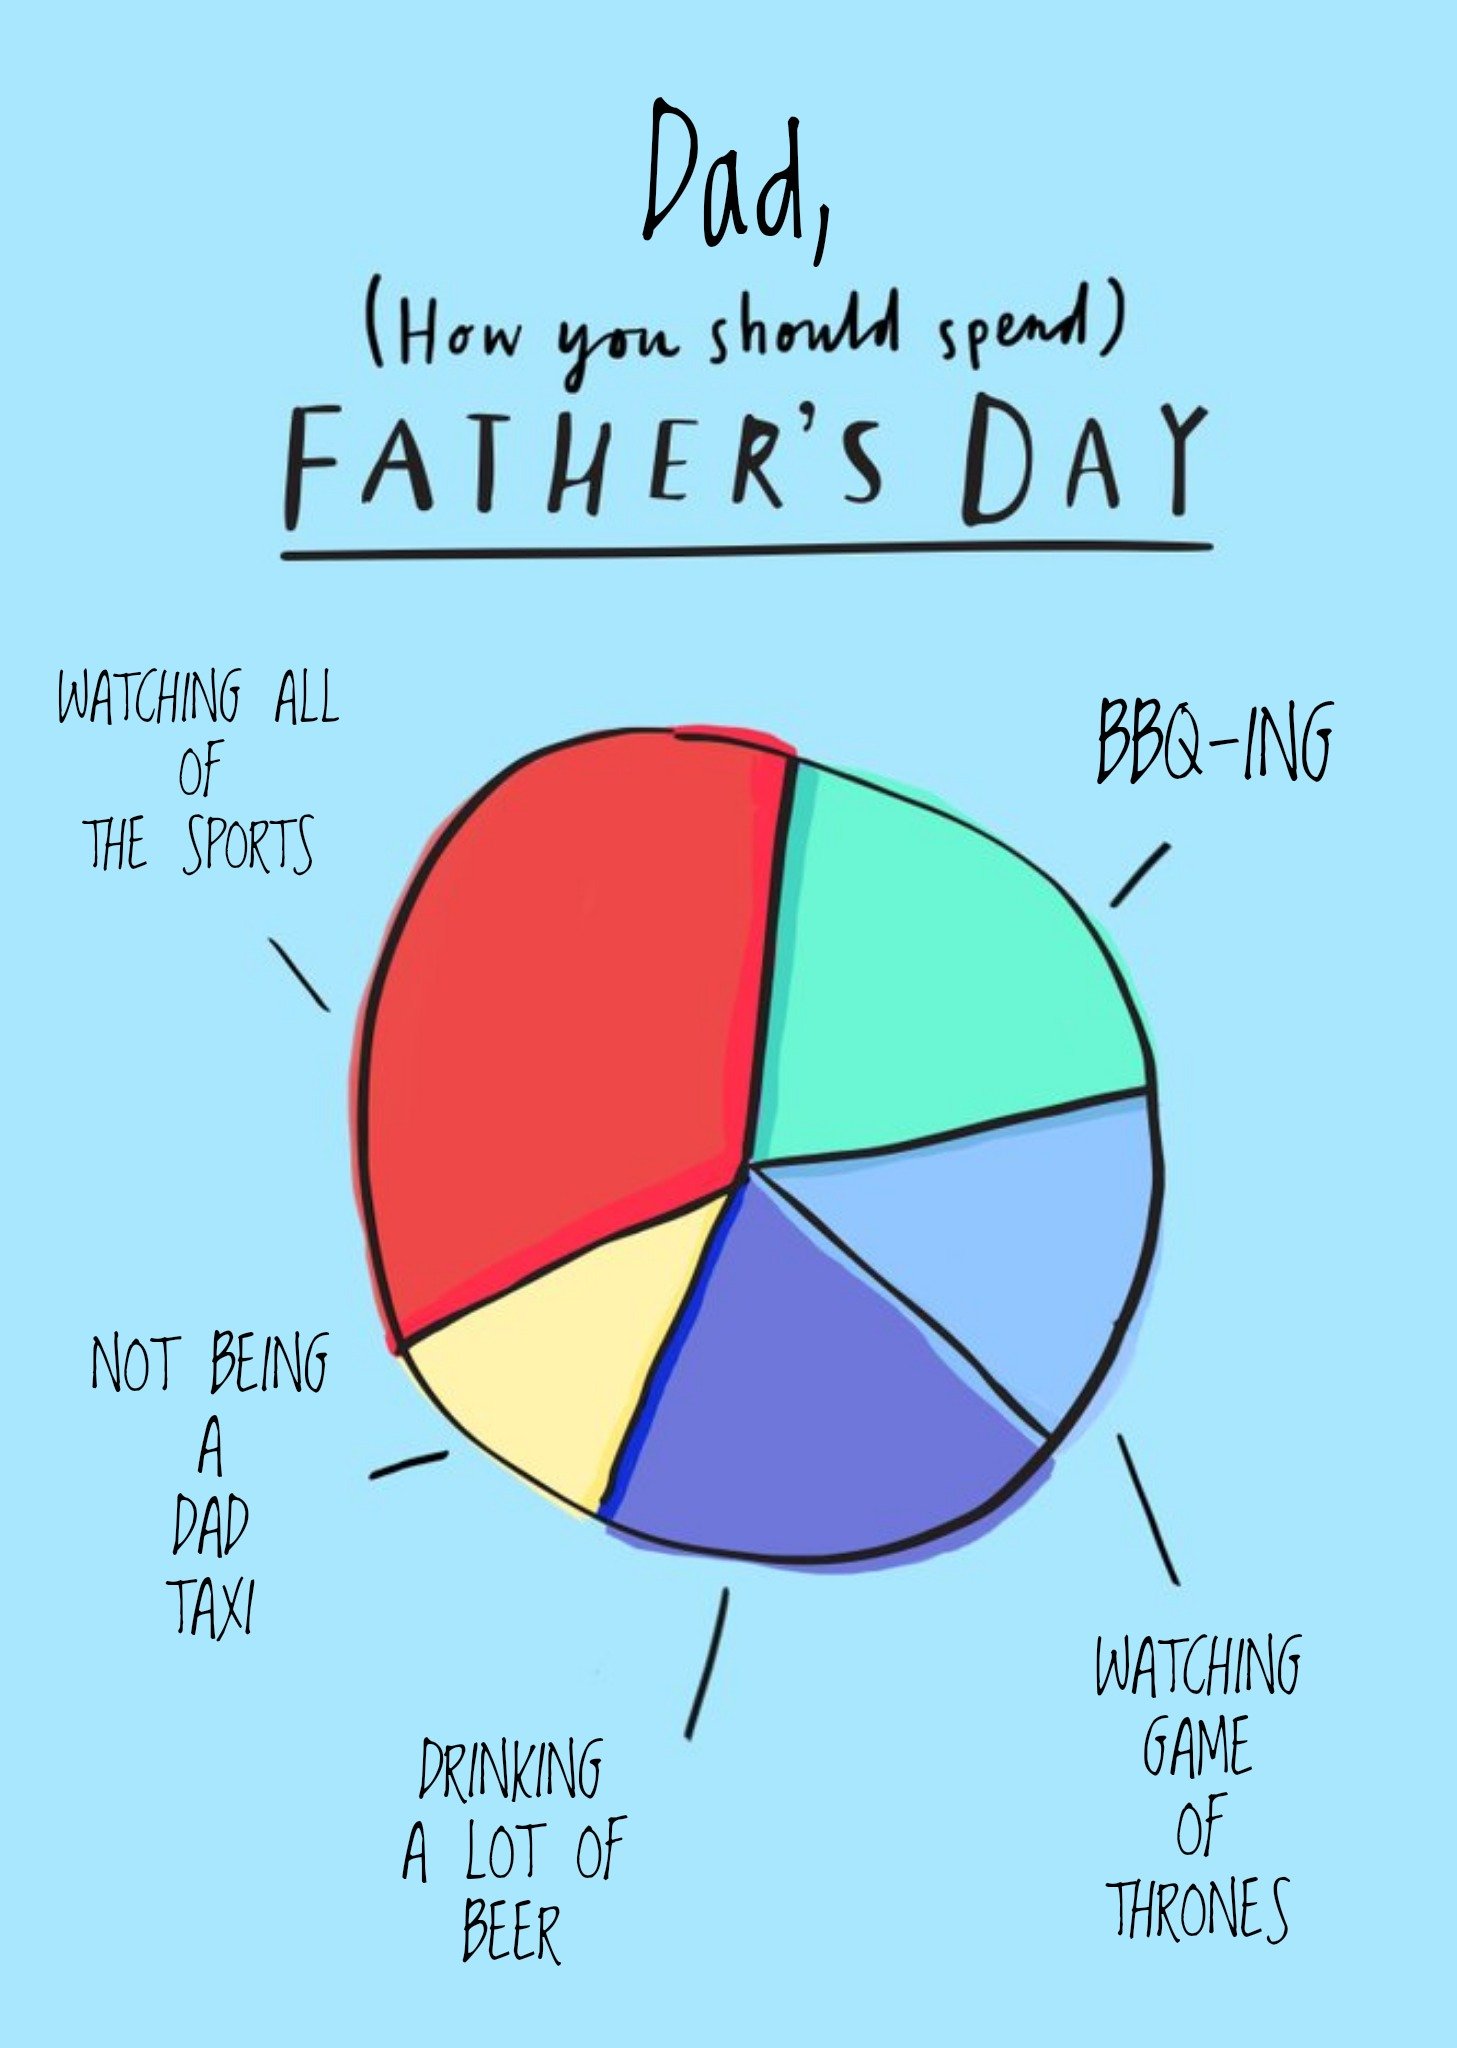 Moonpig Pie Chart How To Spend Father's Day Card Ecard